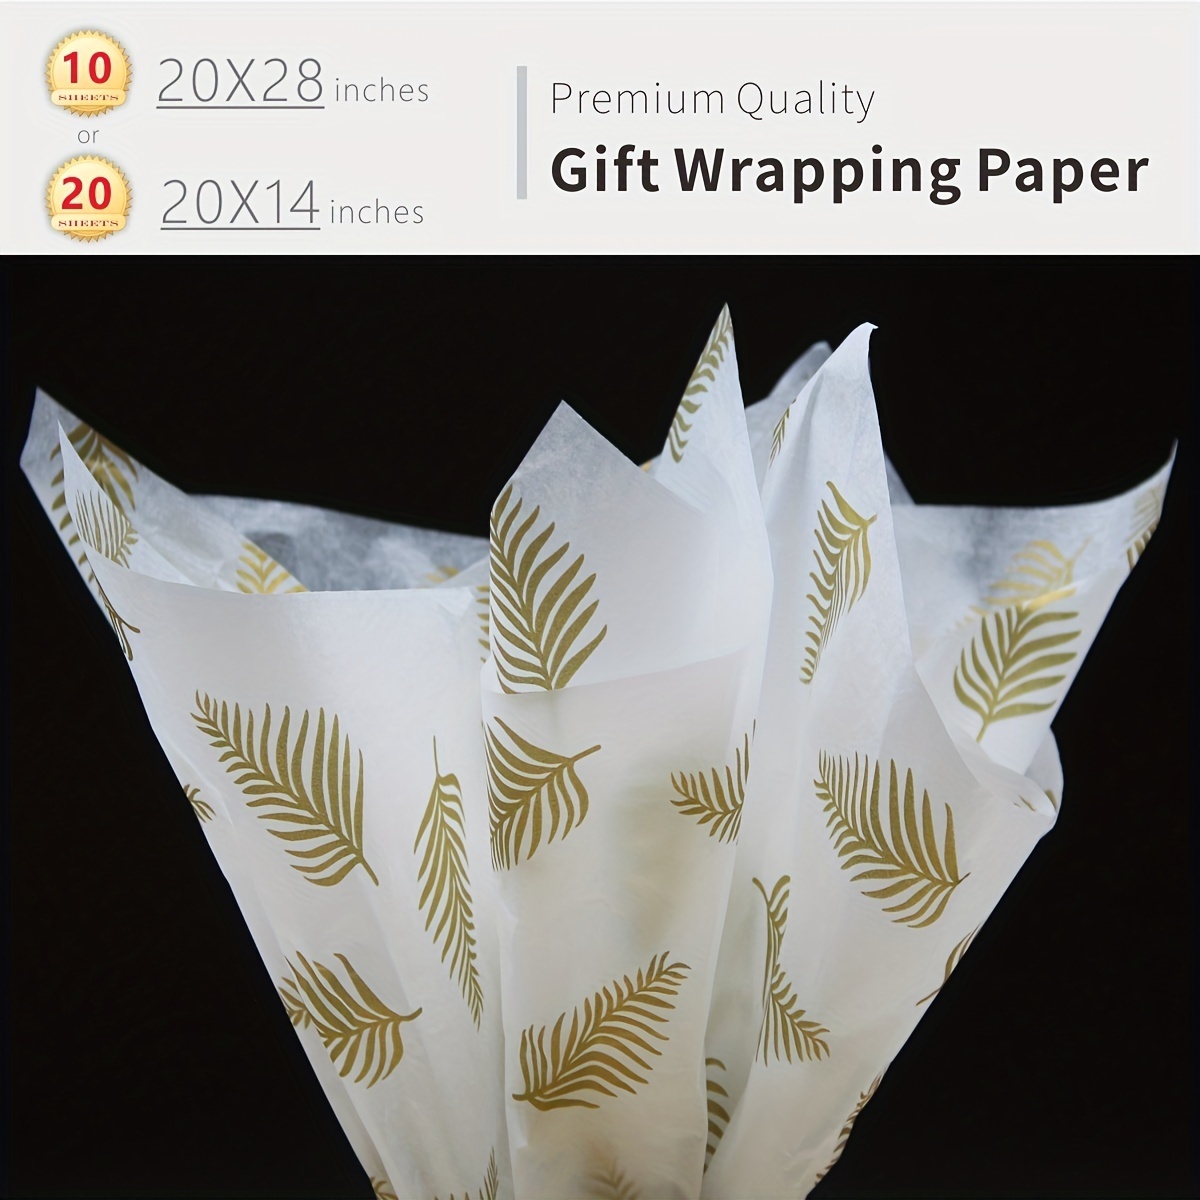 Gray Tissue Paper Squares, Bulk 10 Sheets, Premium Gift Wrap and